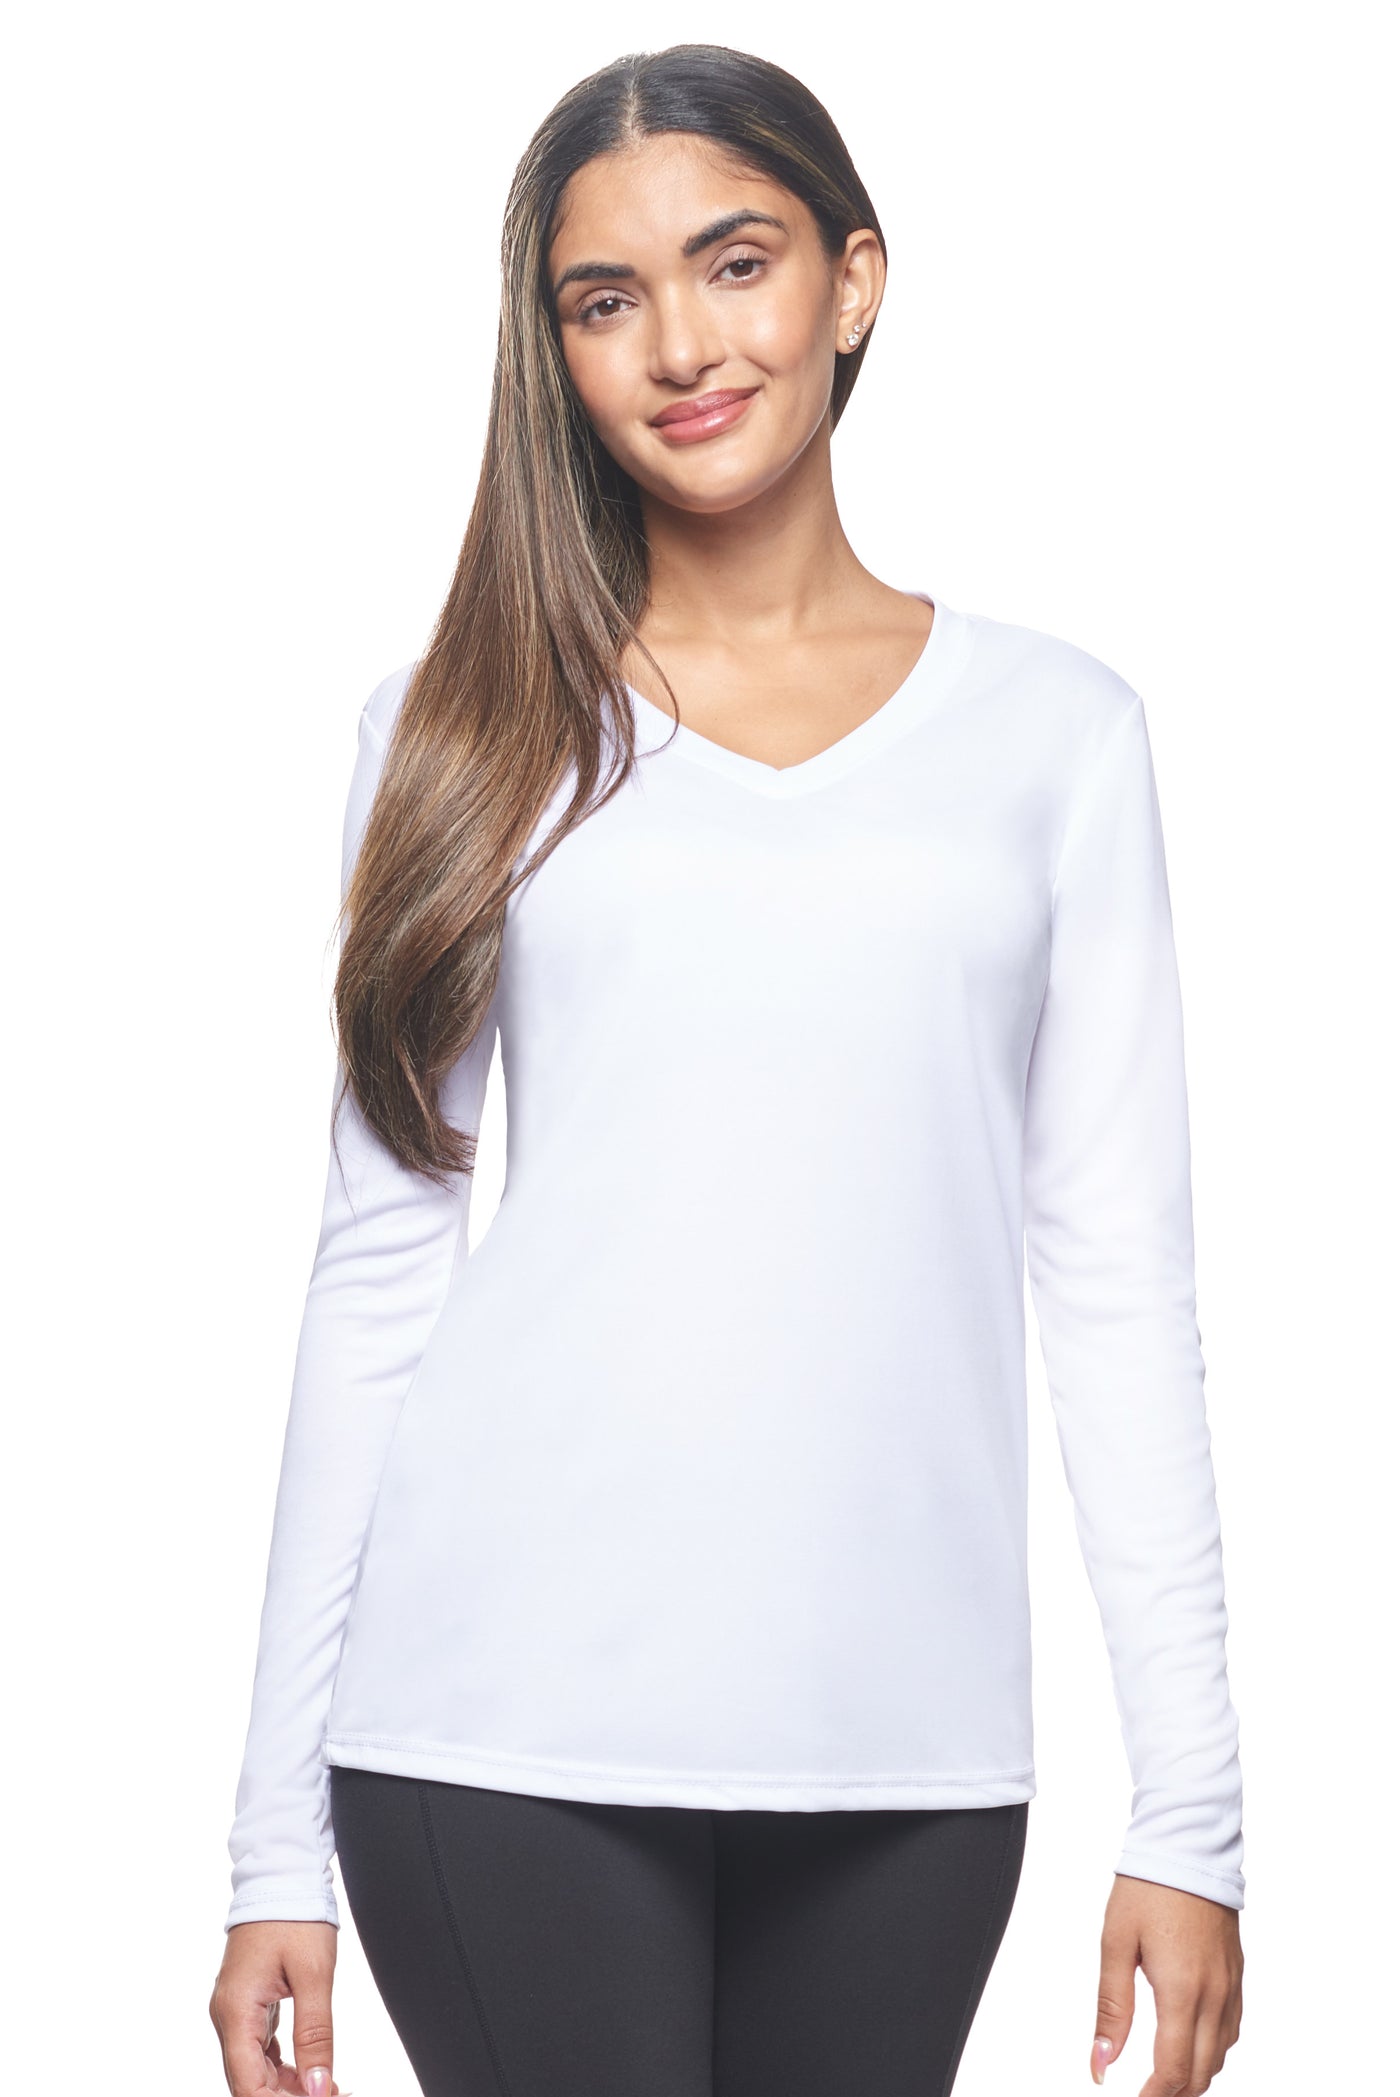 Expert Brand Retail Womens Activewear Womens Sportswear Made in USA Long Sleeve Tec Tee Runners Tee V Neck white#color_white